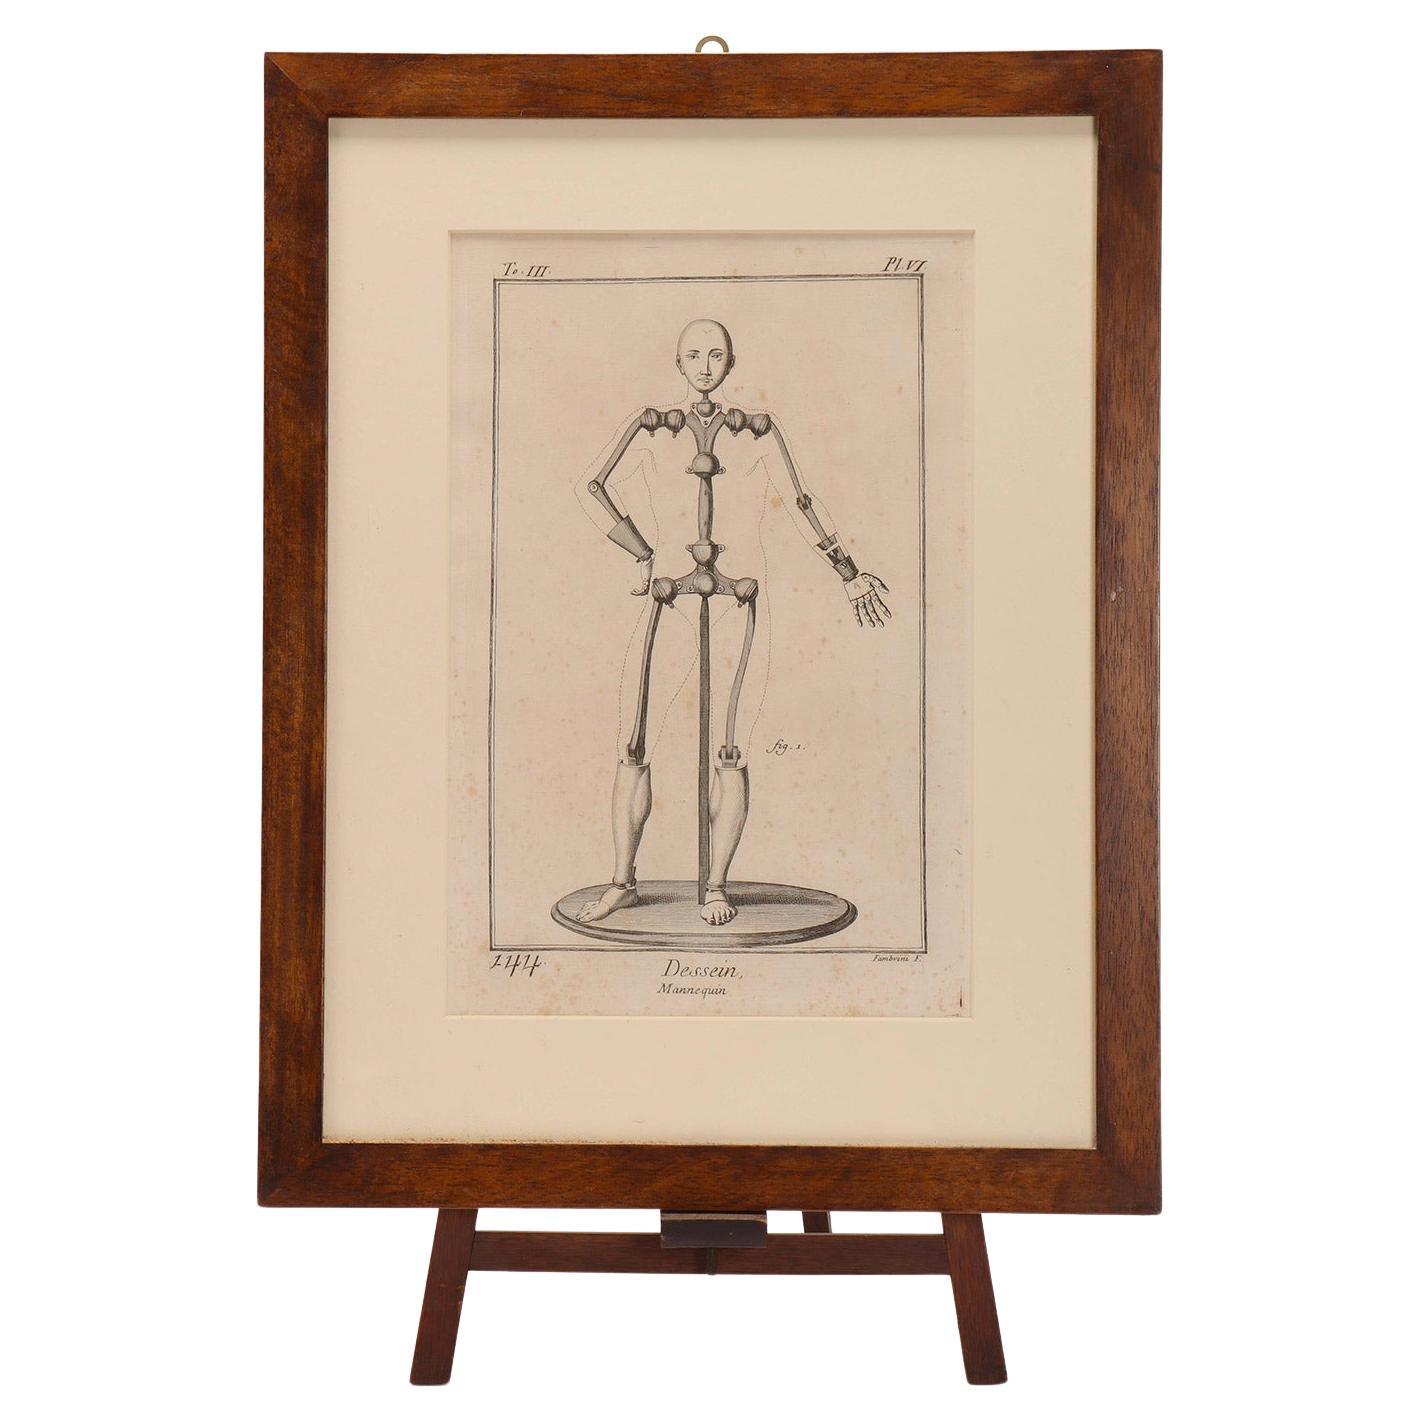 Print on paper depicting a dummy, Italy 1750-1800. 